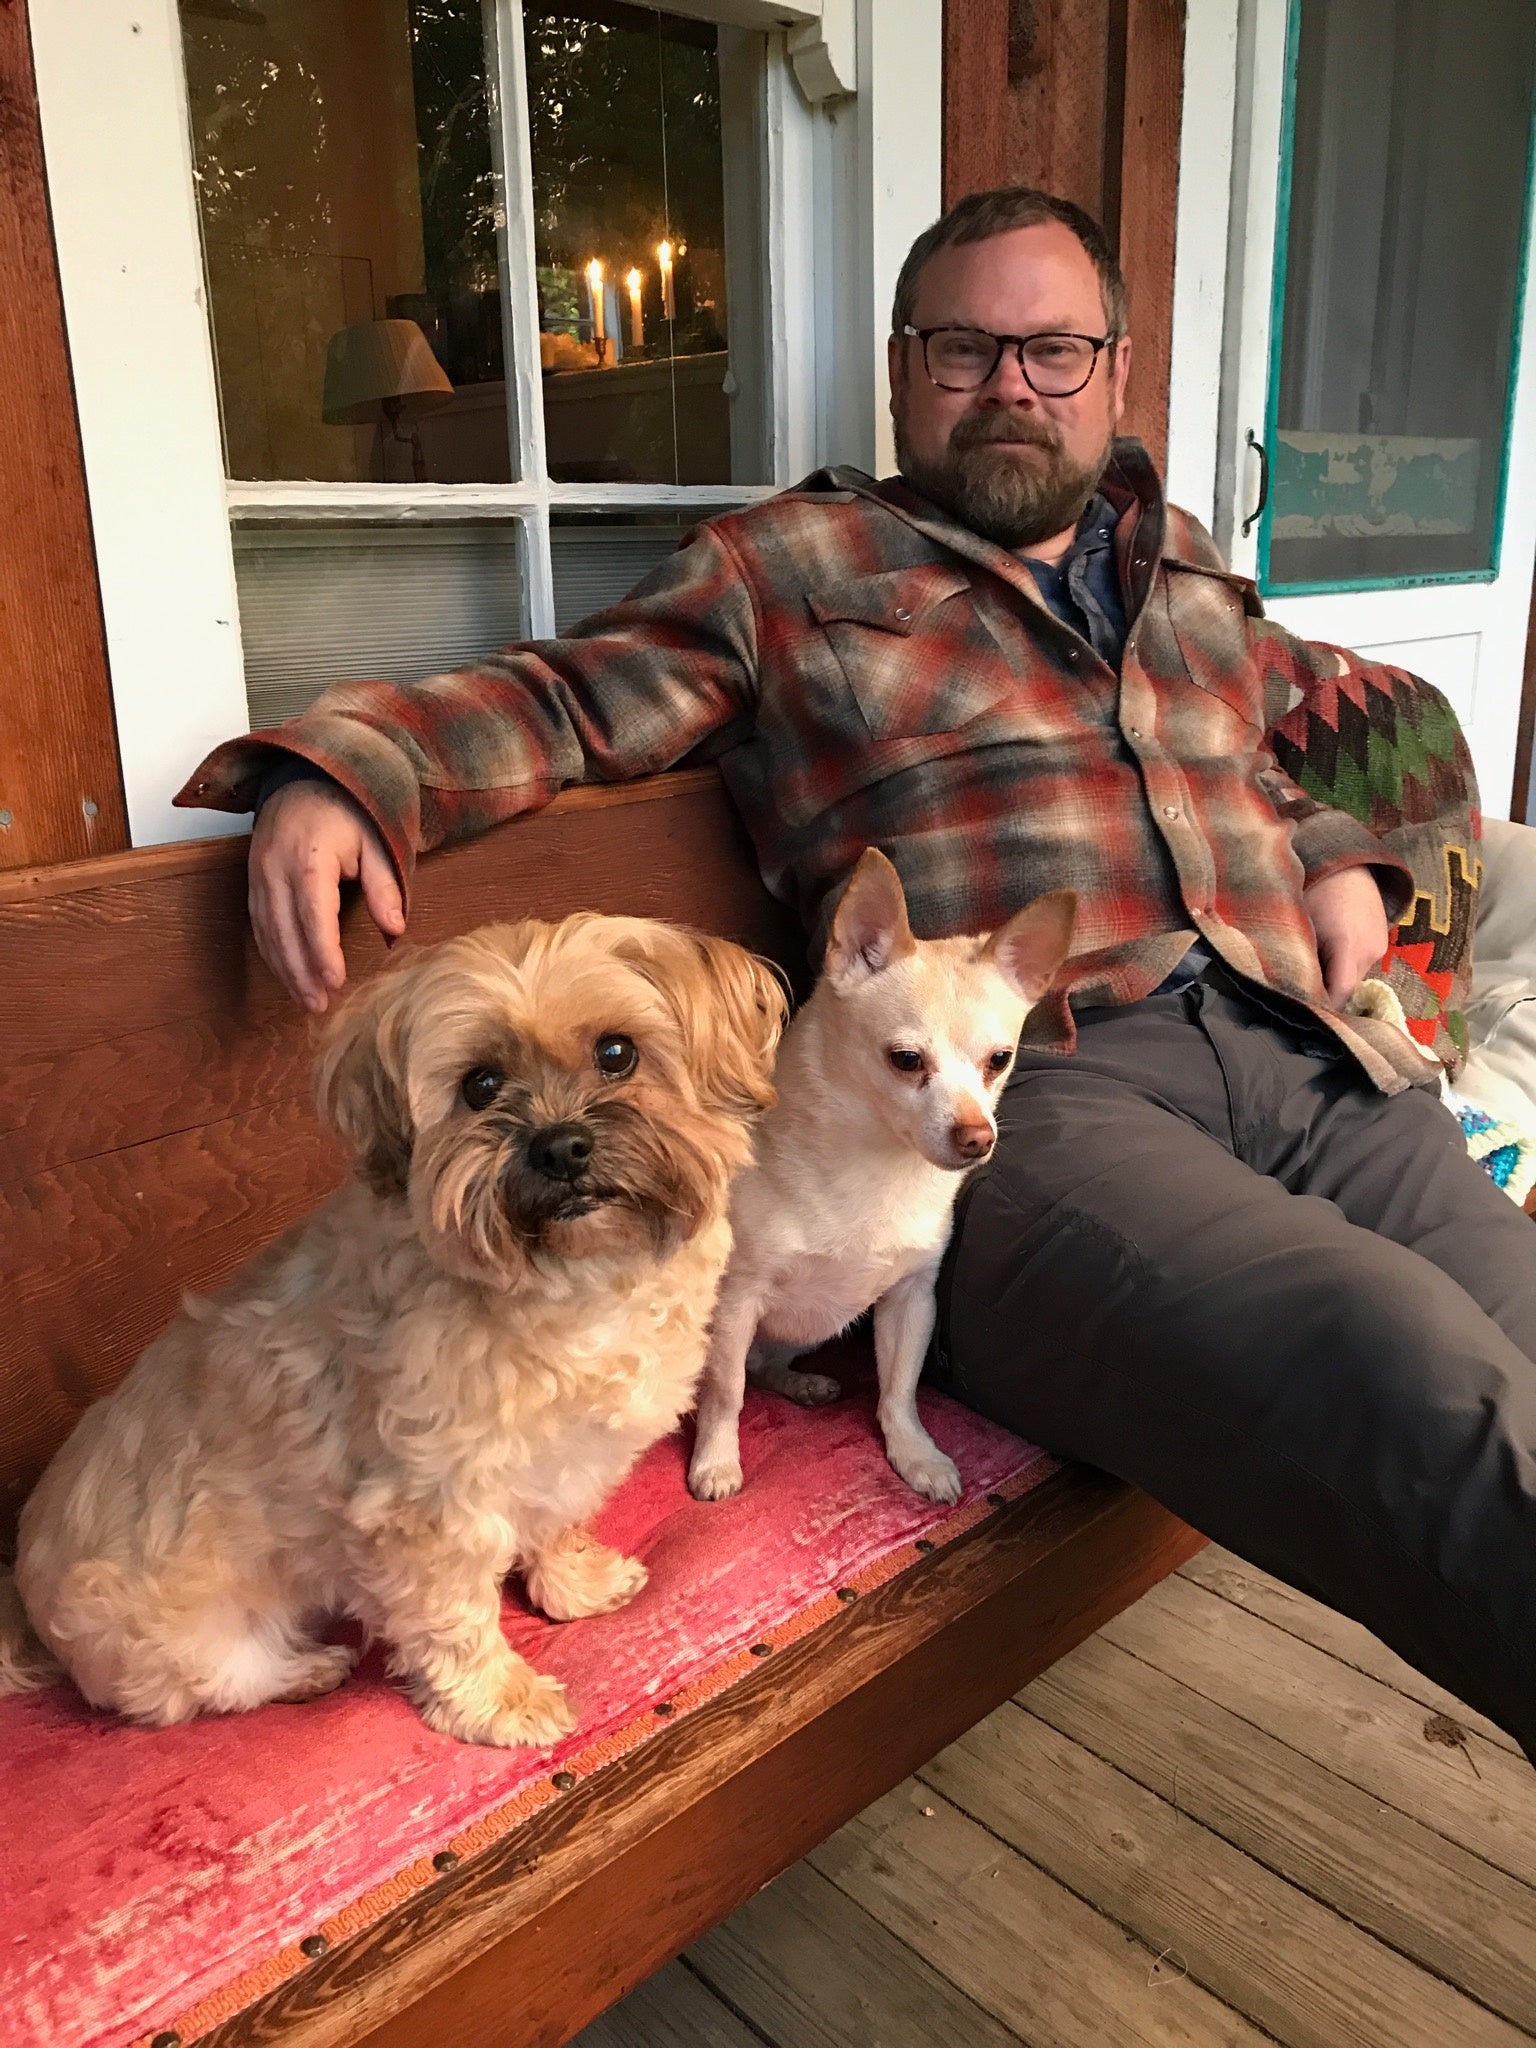 Man sits on bench with two dogs